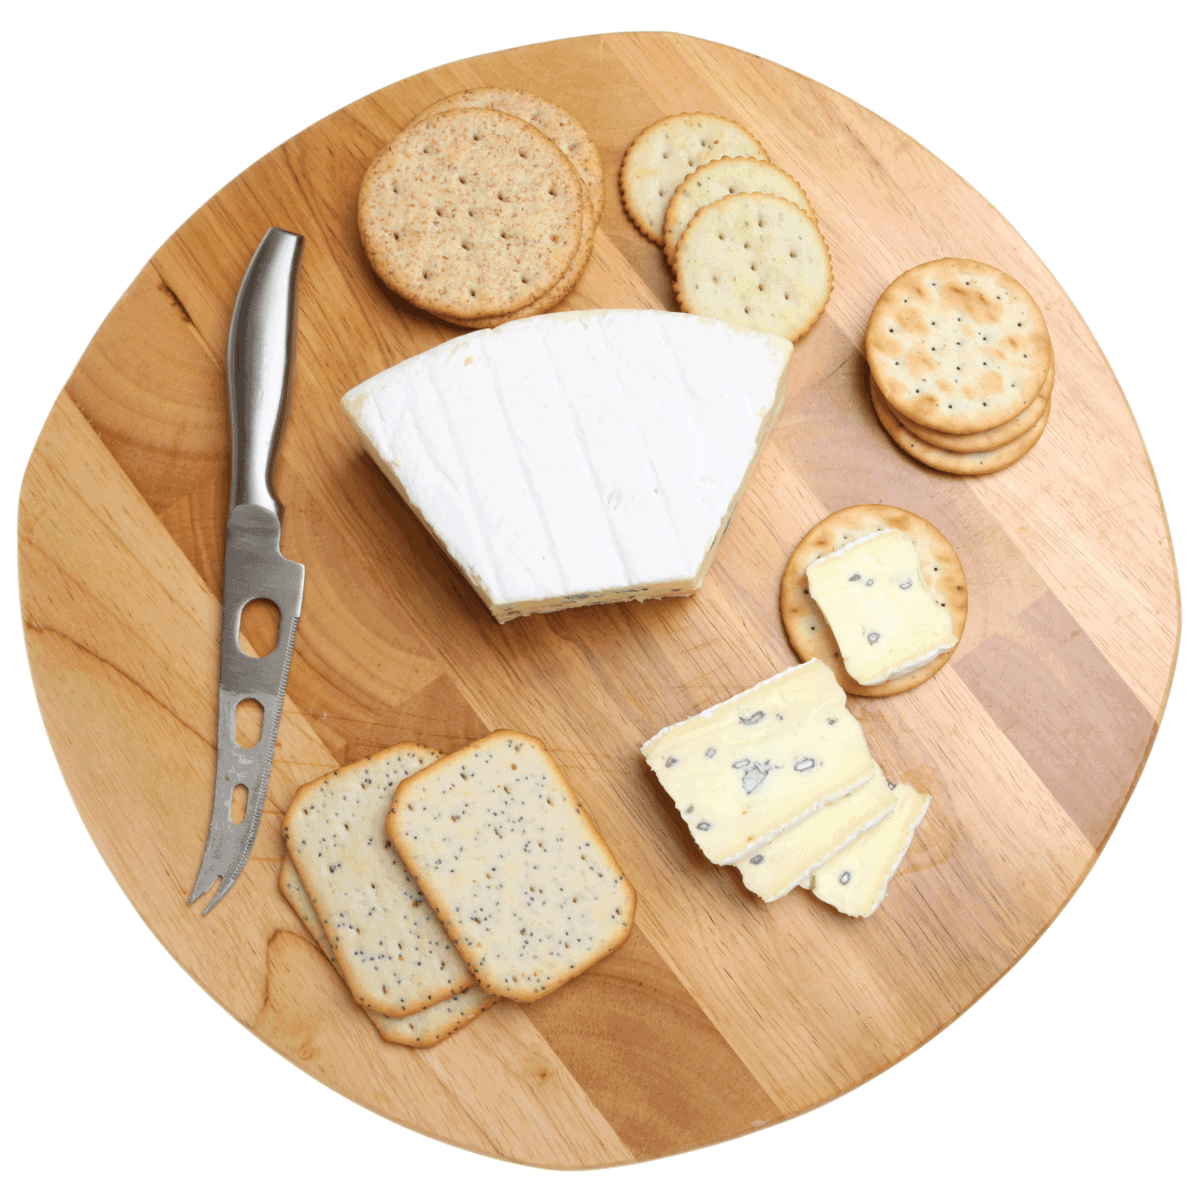 Cheeseboard with soft blue cheese and biscuits.